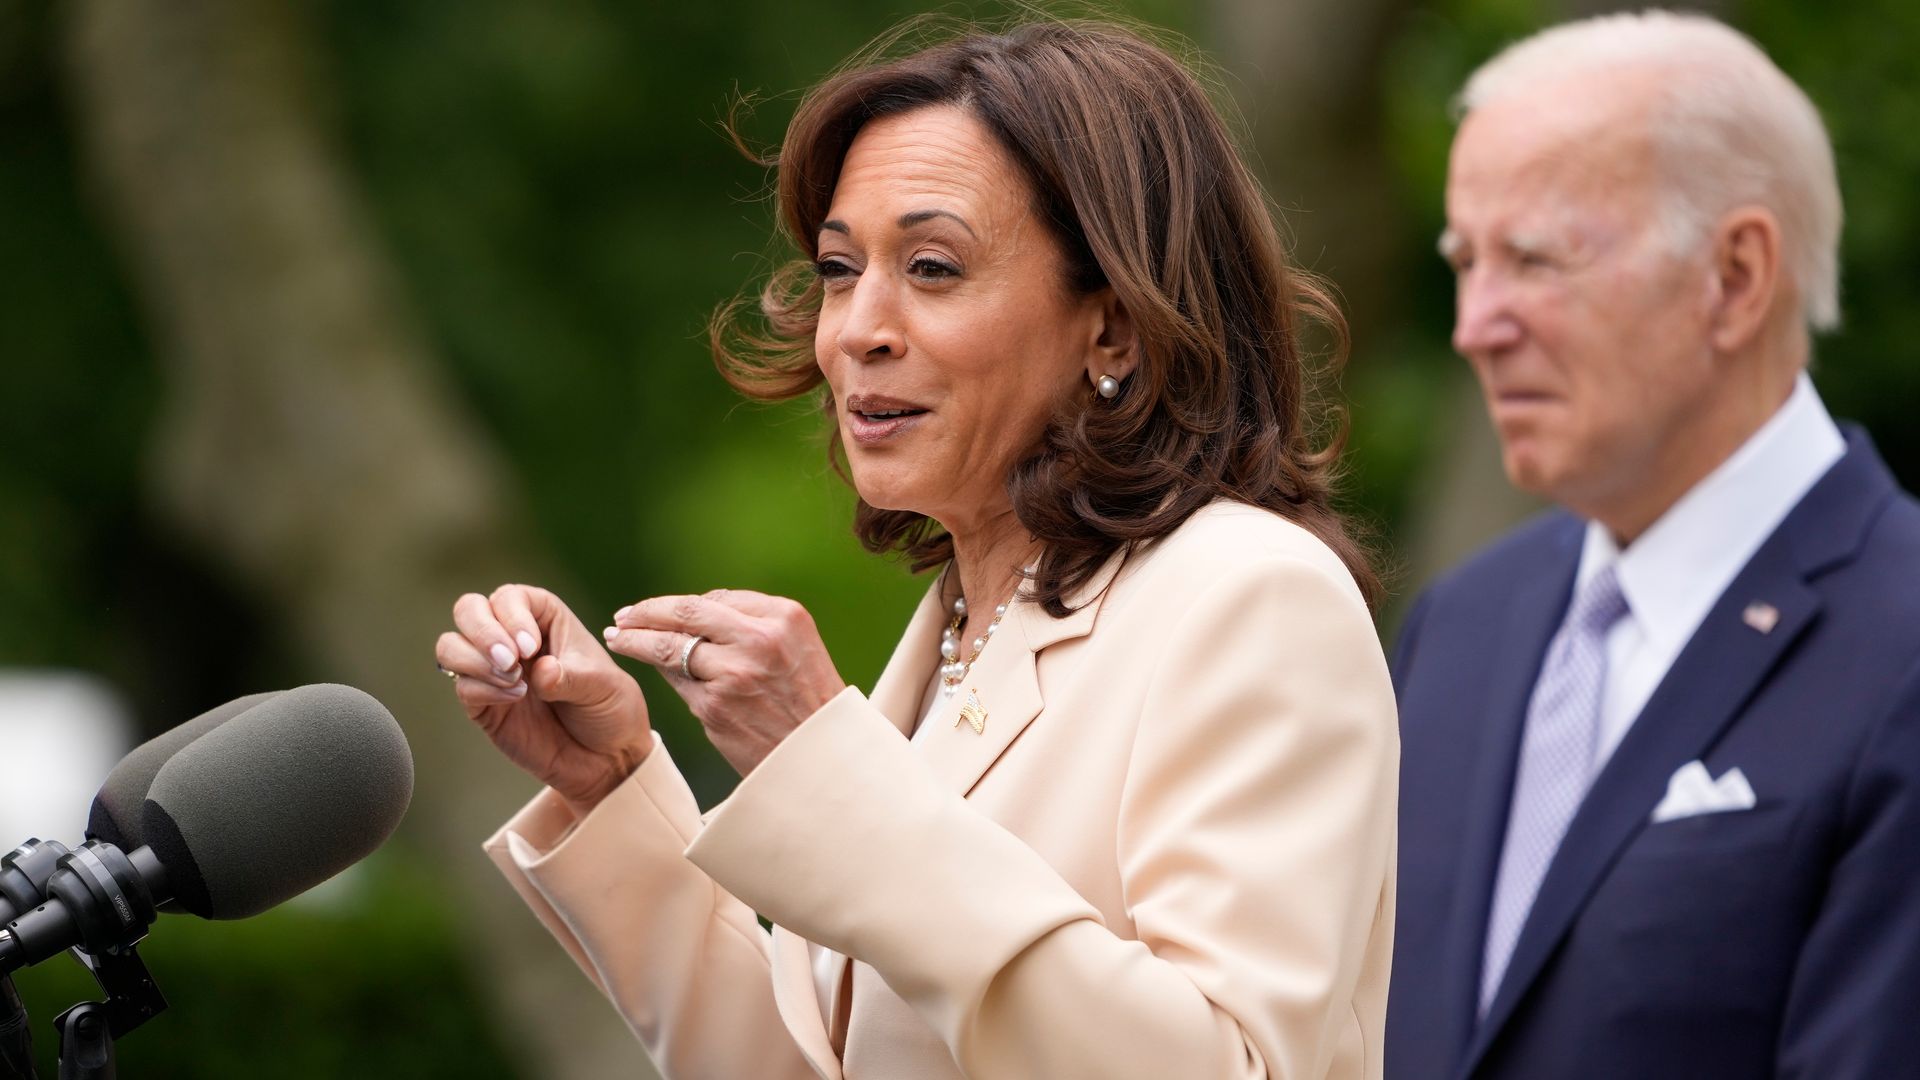 Some think Harris is a liability for President Biden in 2024. But others believe the vice president is being held to an unfair standard.